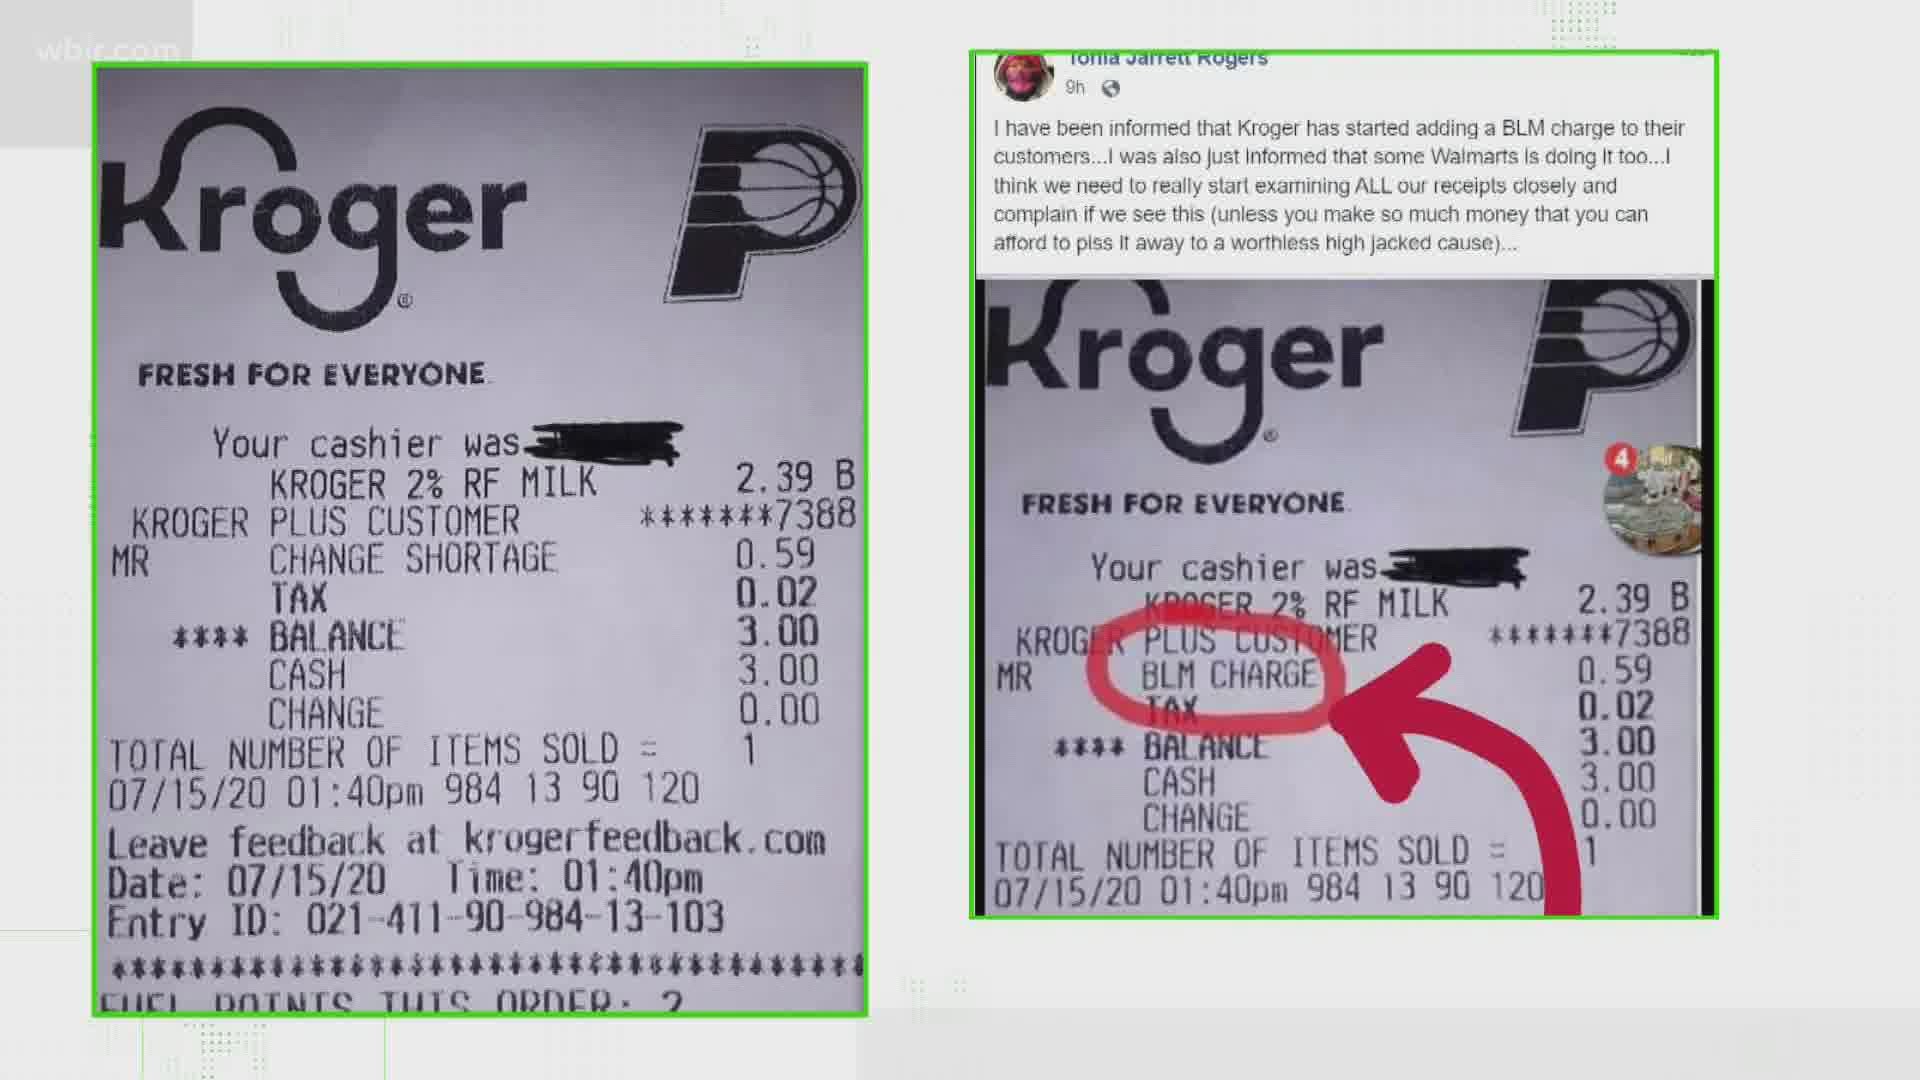 The fake receipt went viral online, misleading people that the large grocery chain was charging a "BLM Fee."